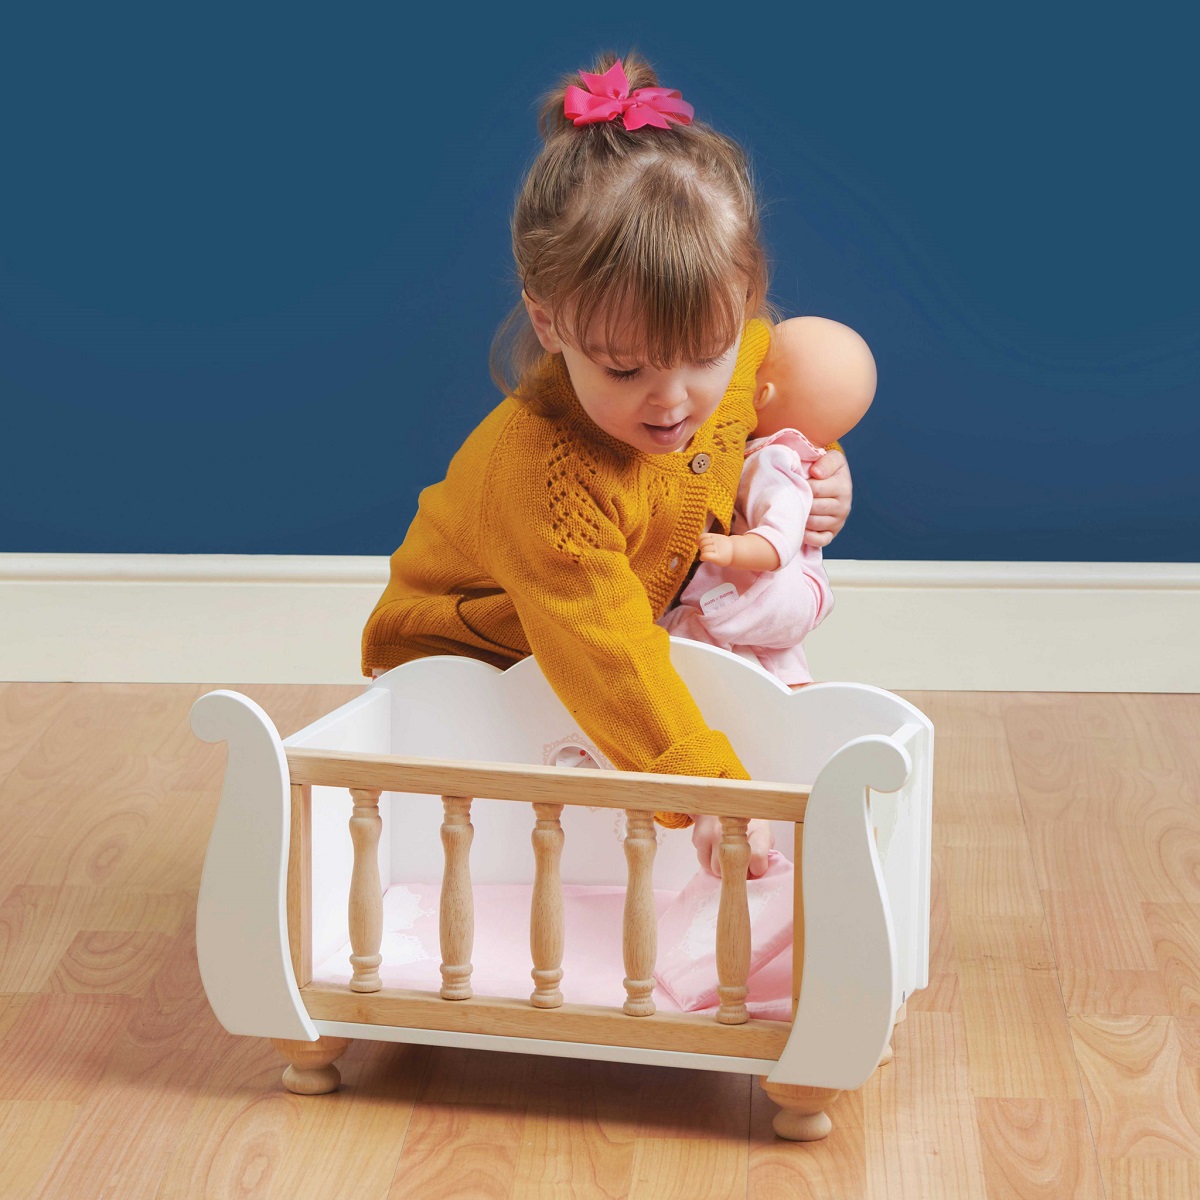 Roleplay - Doll Sleigh Cot